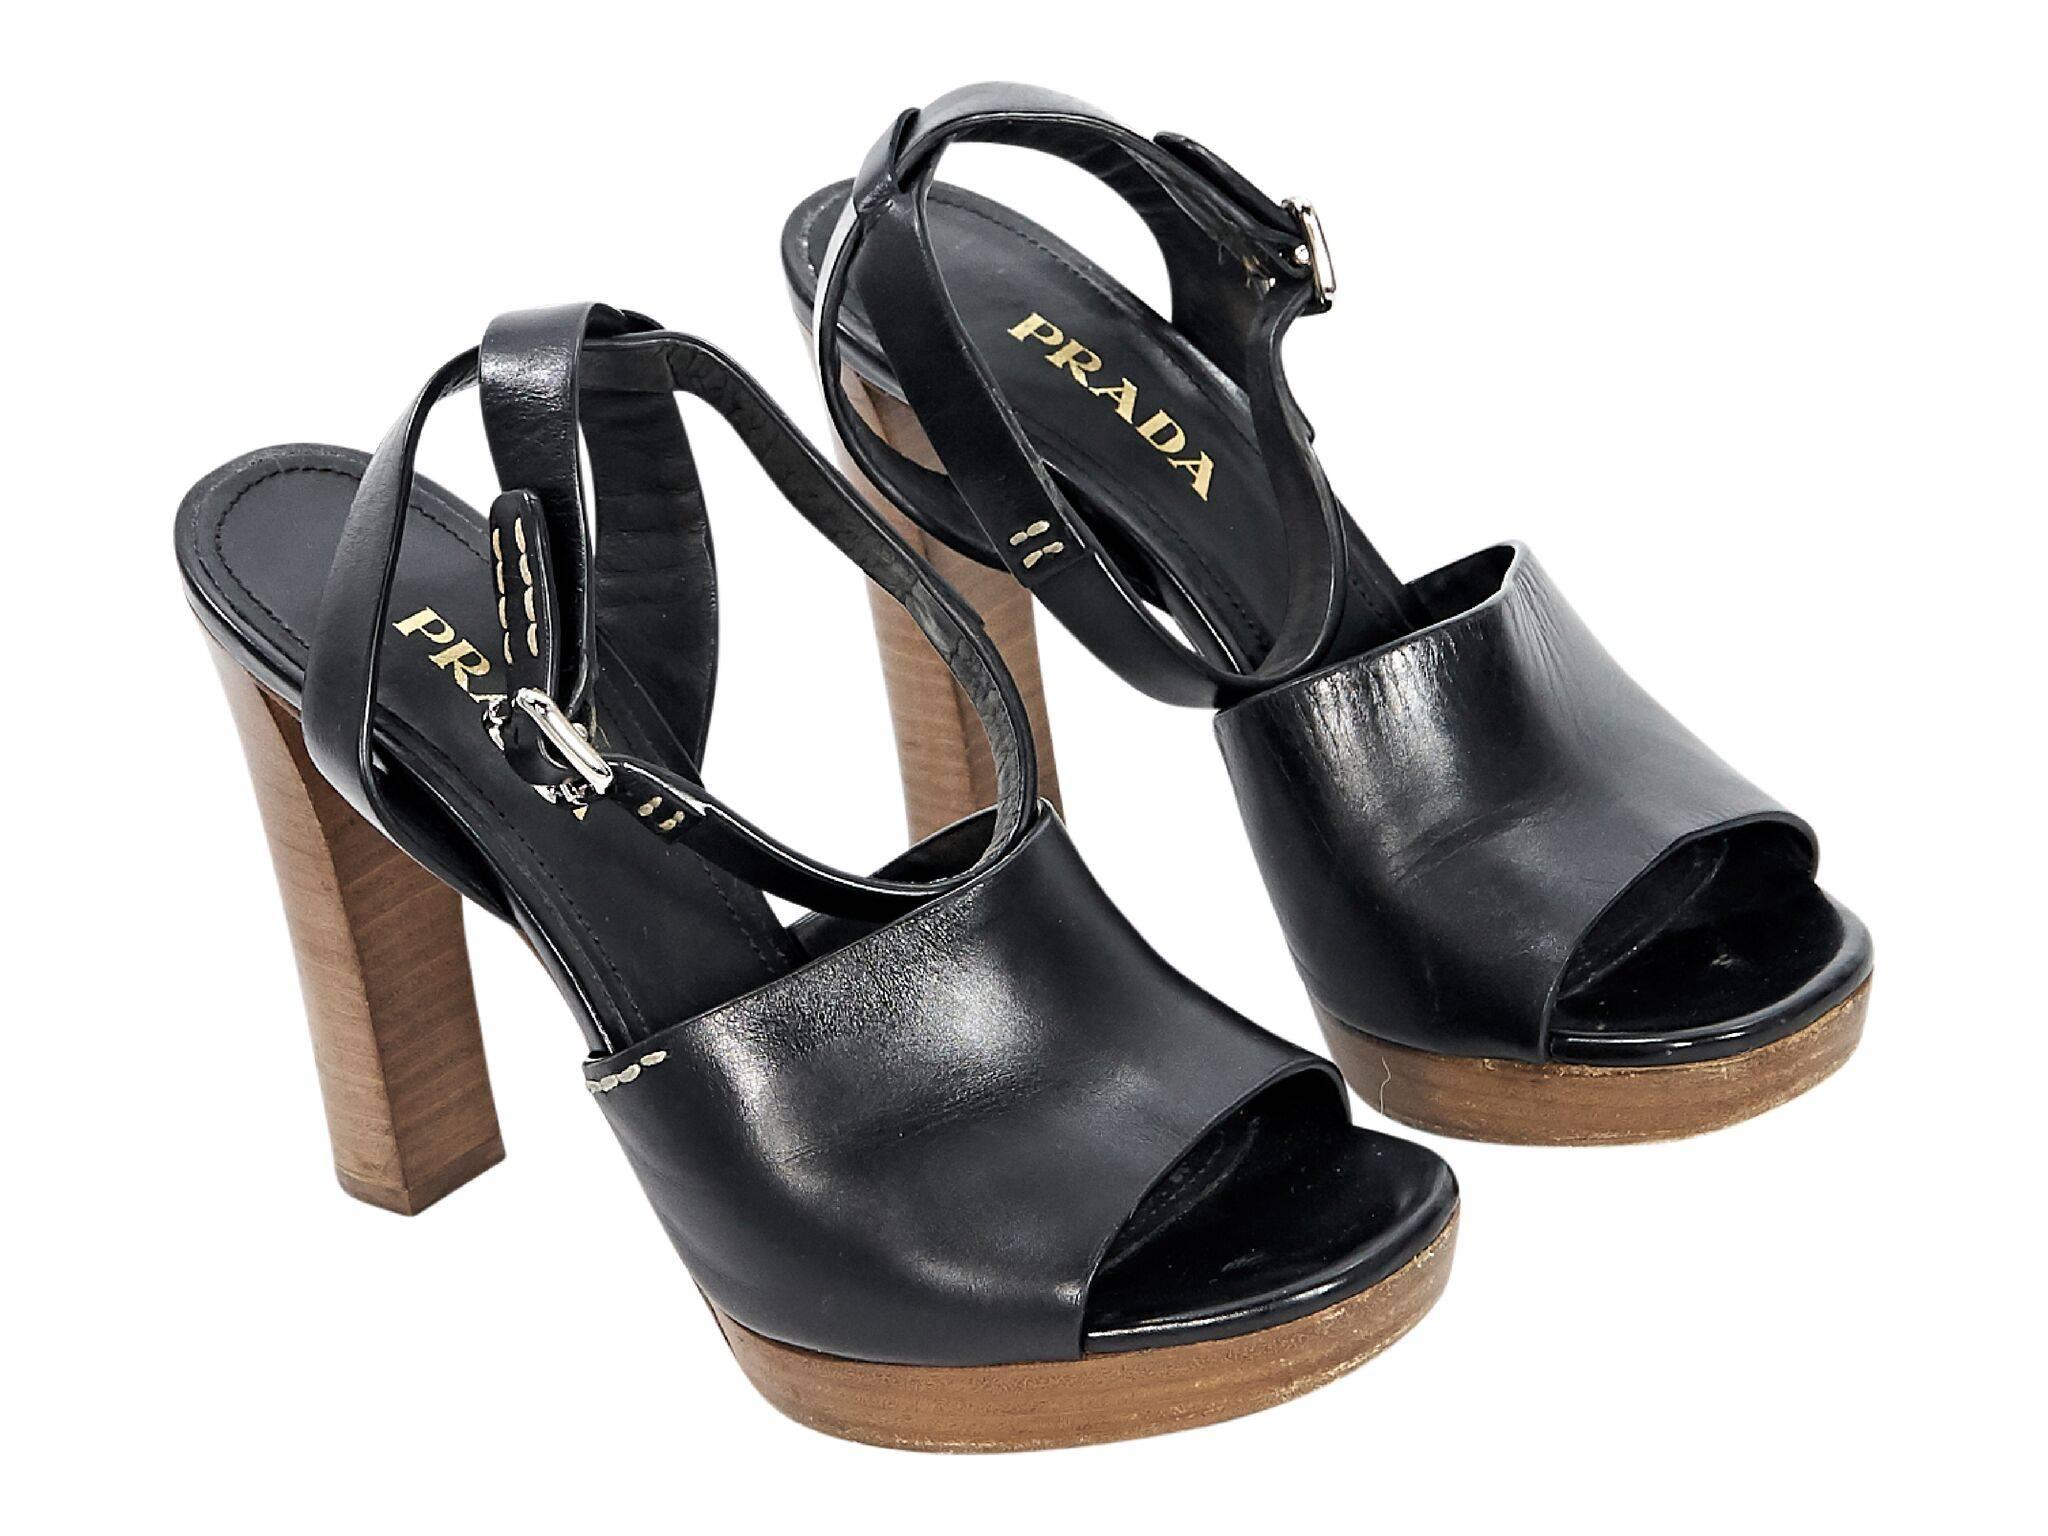 Product details:  Black leather platform sandals by Prada.  Adjustable ankle strap.  Open toe.  Towering stacked heel and platform design. IT size 38.5
Condition: Pre-owned. Very good. 
Est. Retail $795